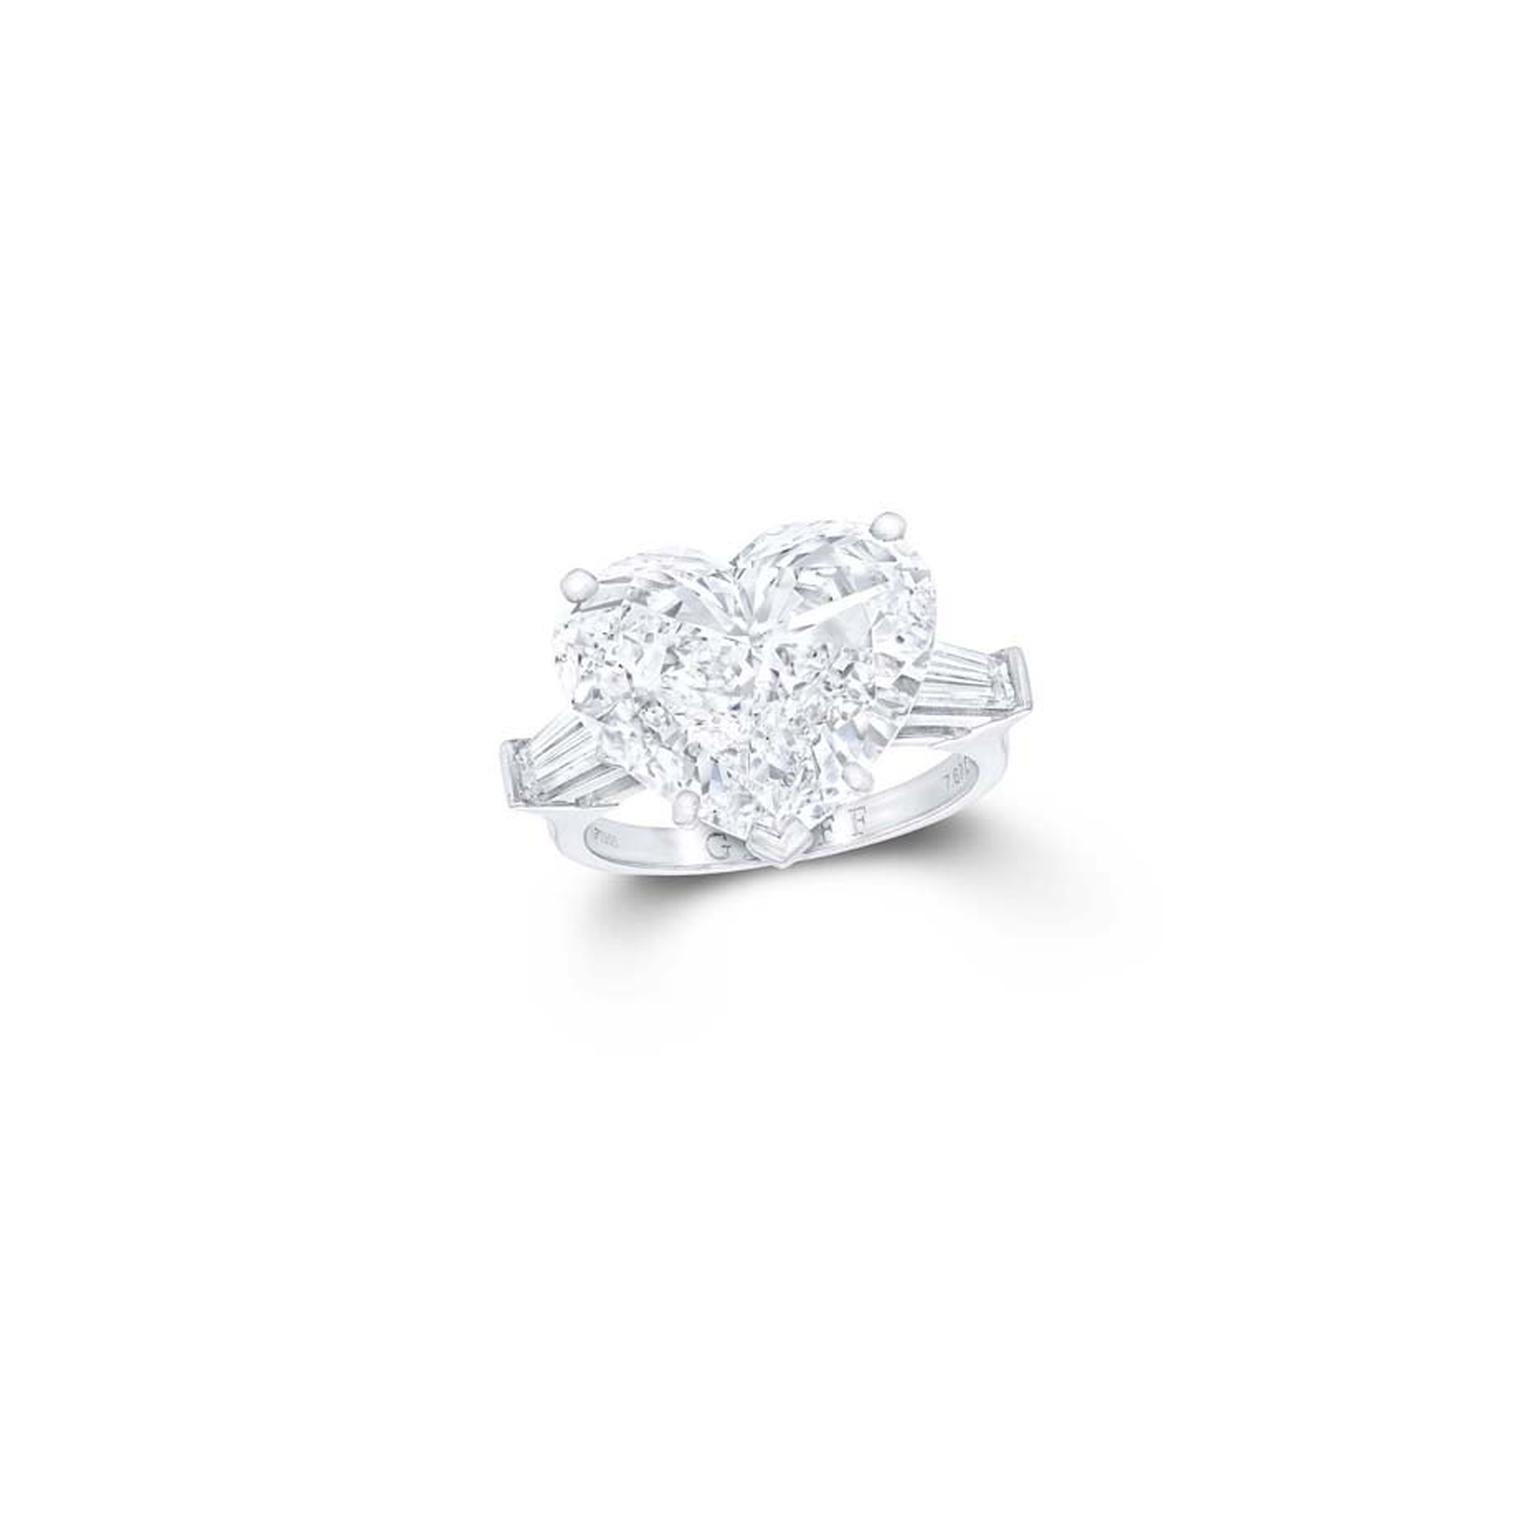 Graff heart-shape diamond engagement ring with tapered baguette diamond shoulders.